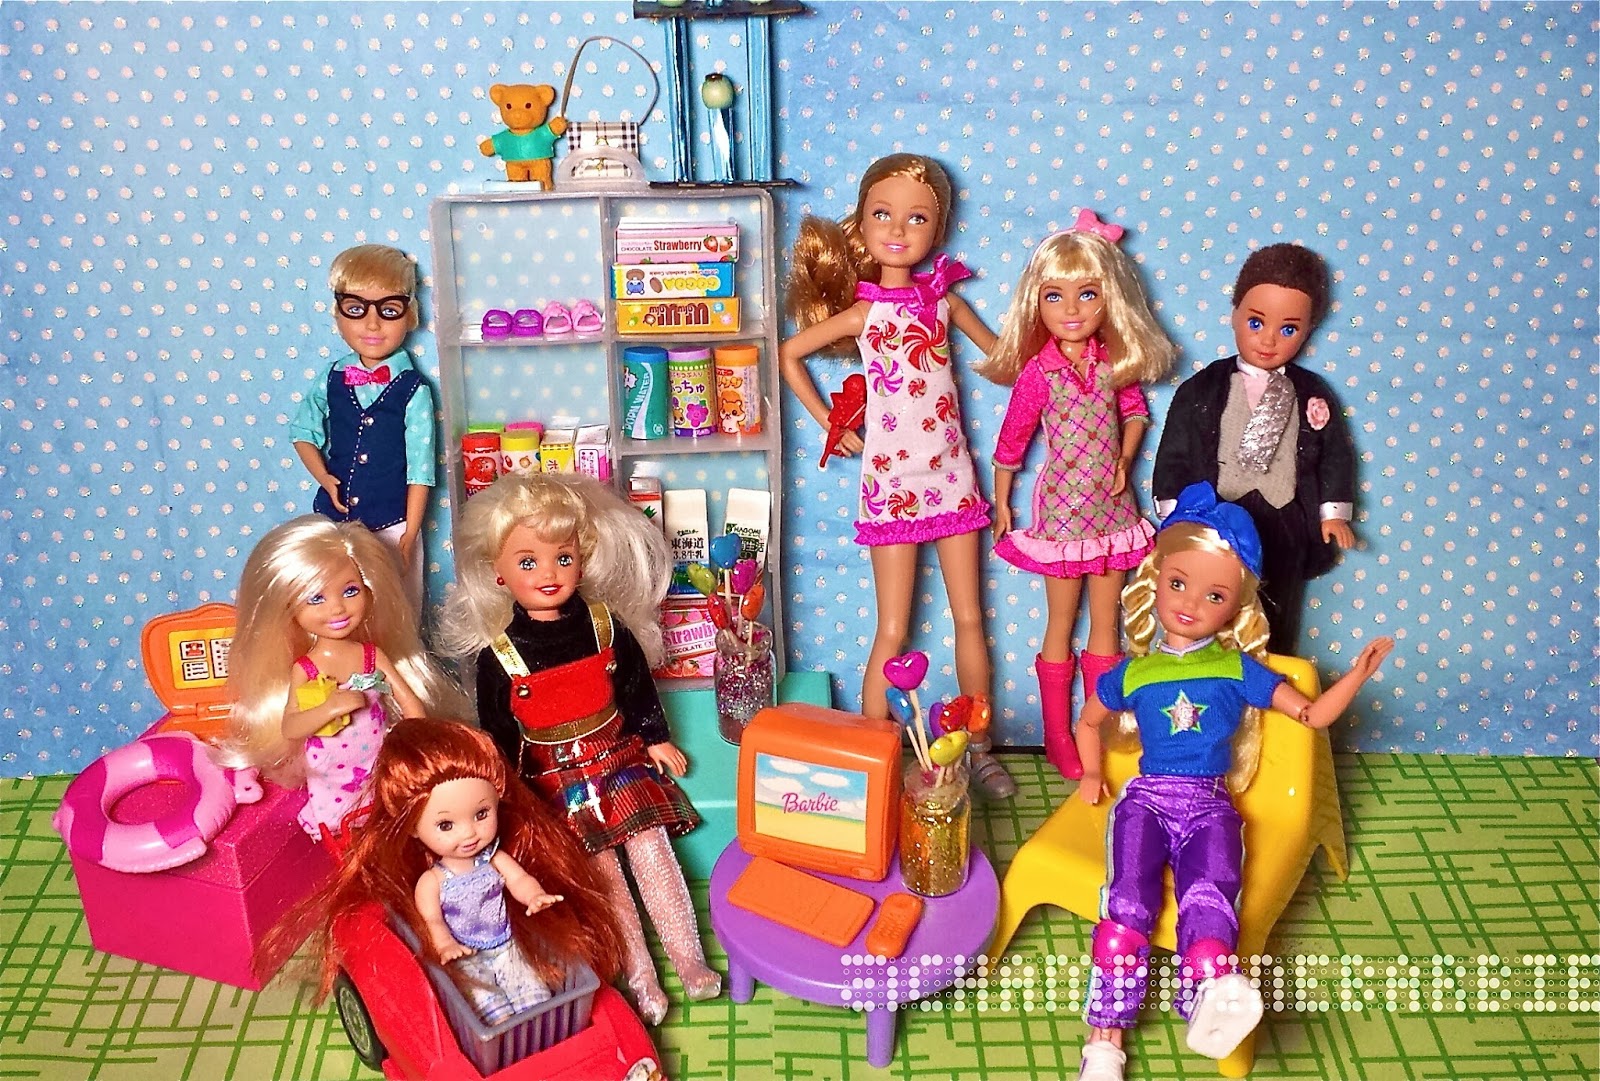 ChampagneBarbie: The twins craze: Max and Marie Barbie Dolls (2013)